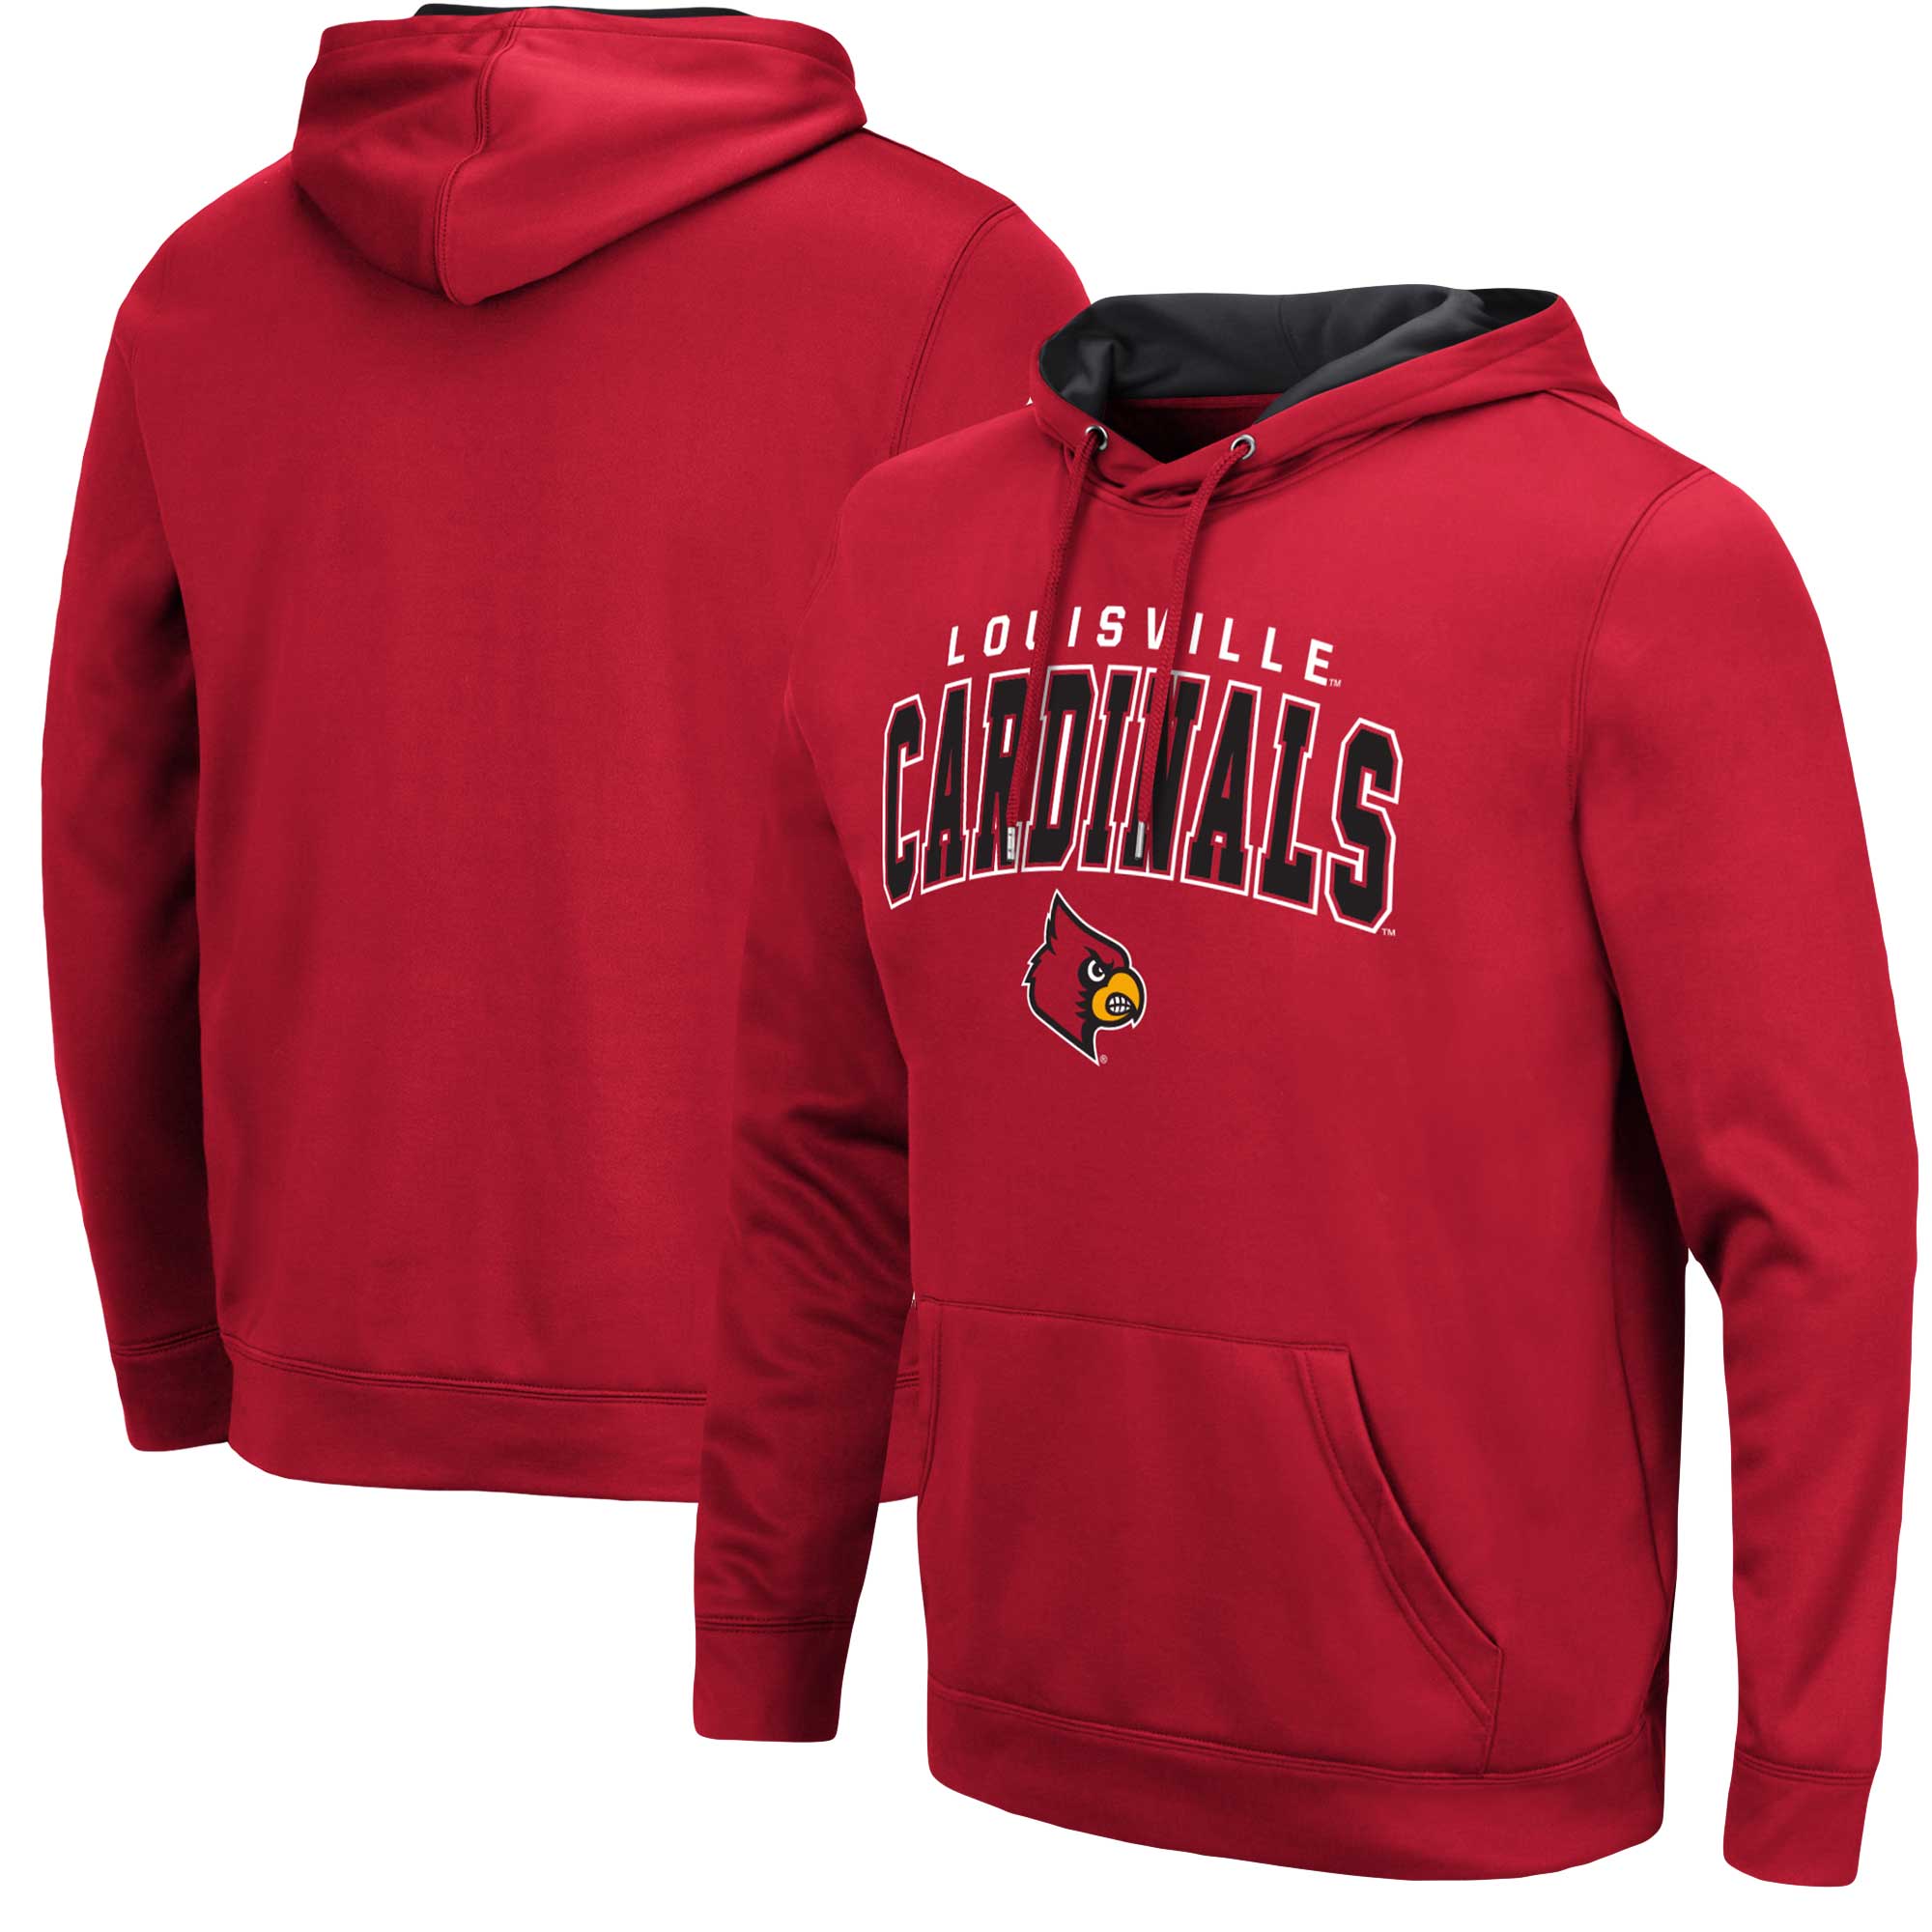 Men's Colosseum Red Louisville Cardinals Resistance-Pullover Hoodie - image 1 of 3